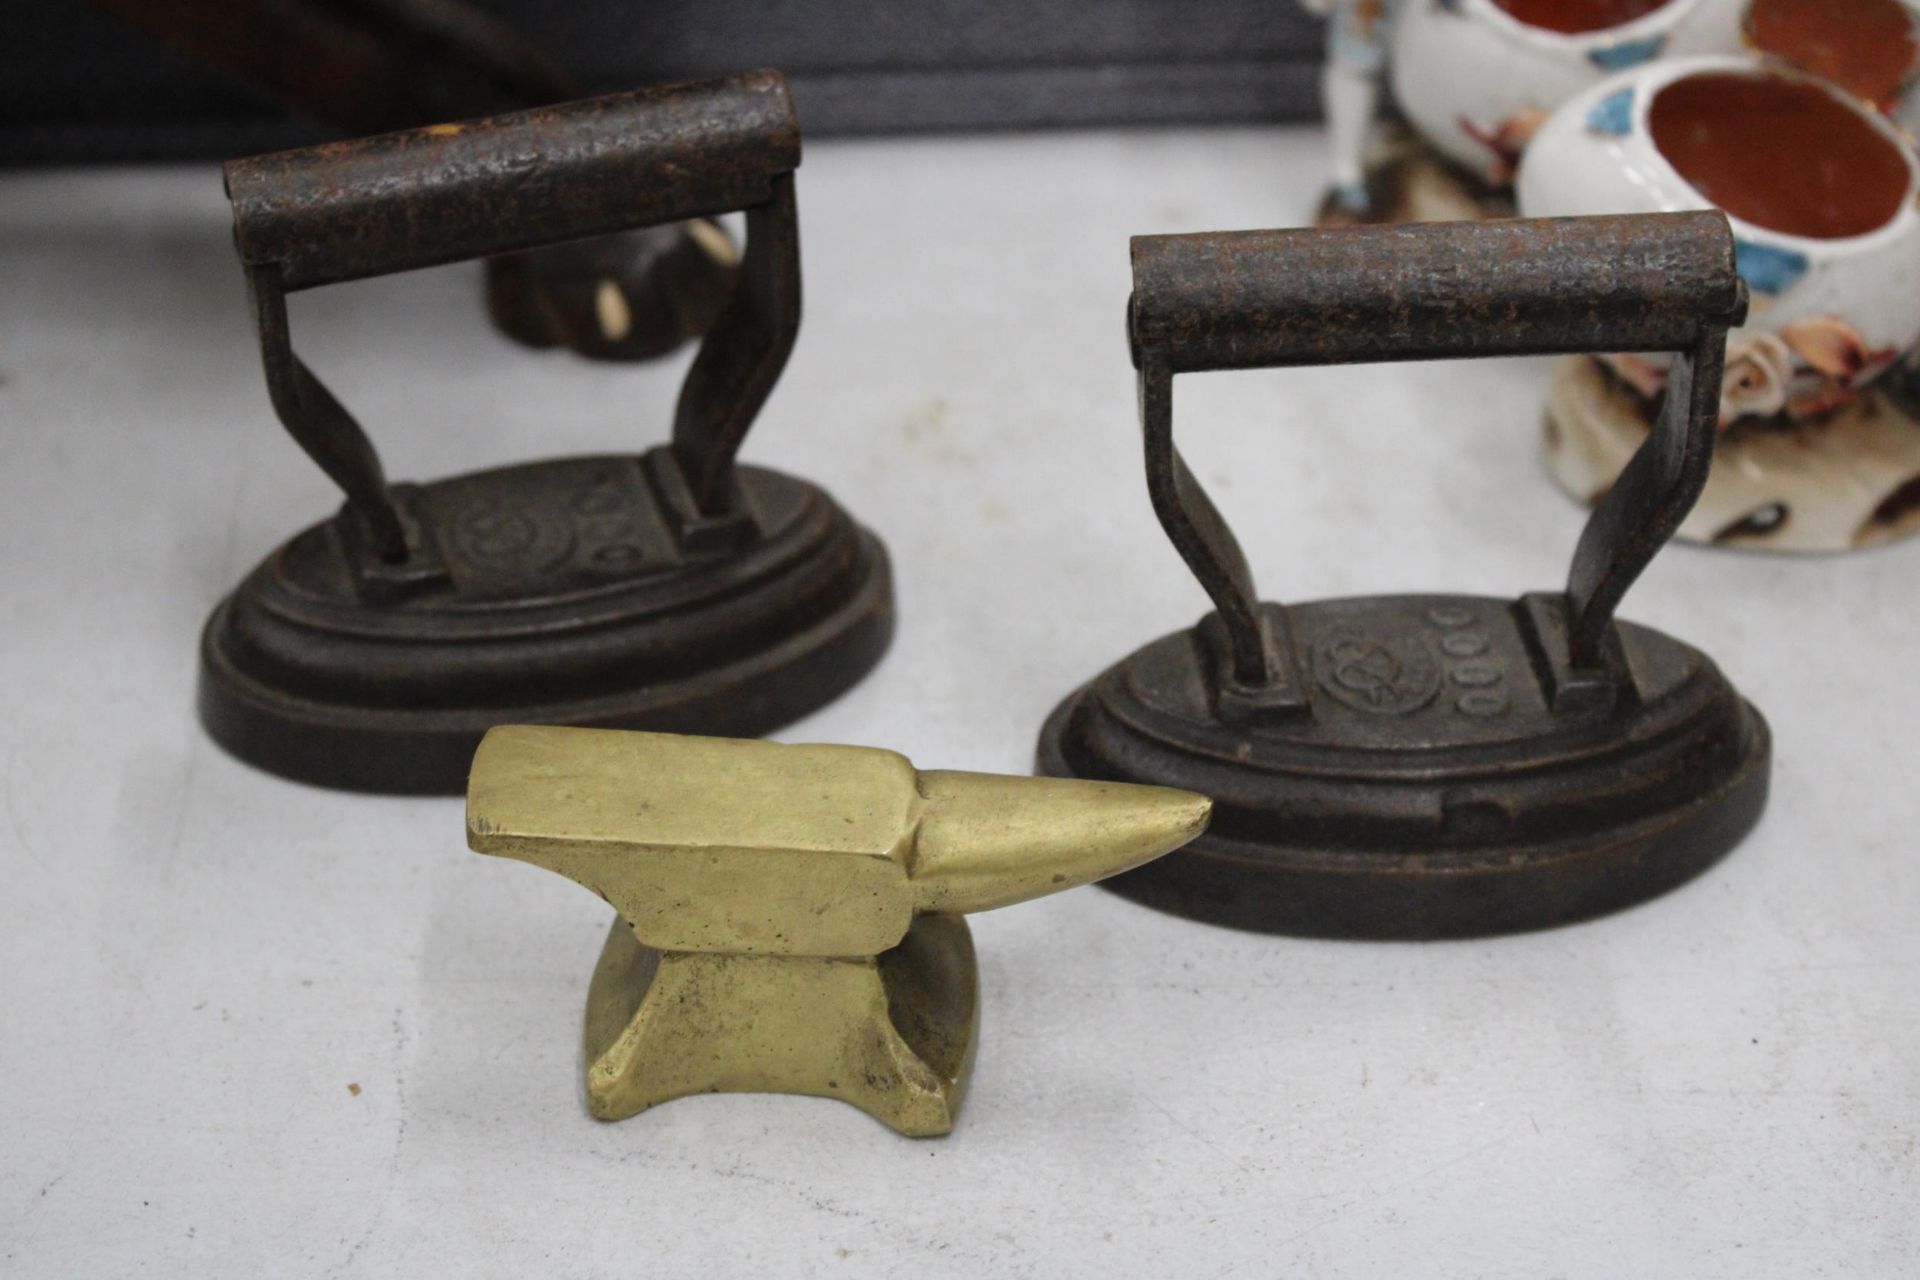 A COLLECTION OF MINIATURE ITEMS TO INCLUDE THREE IRONS, A BRASS ANVIL AND A 'LADY' BELL - Image 4 of 4